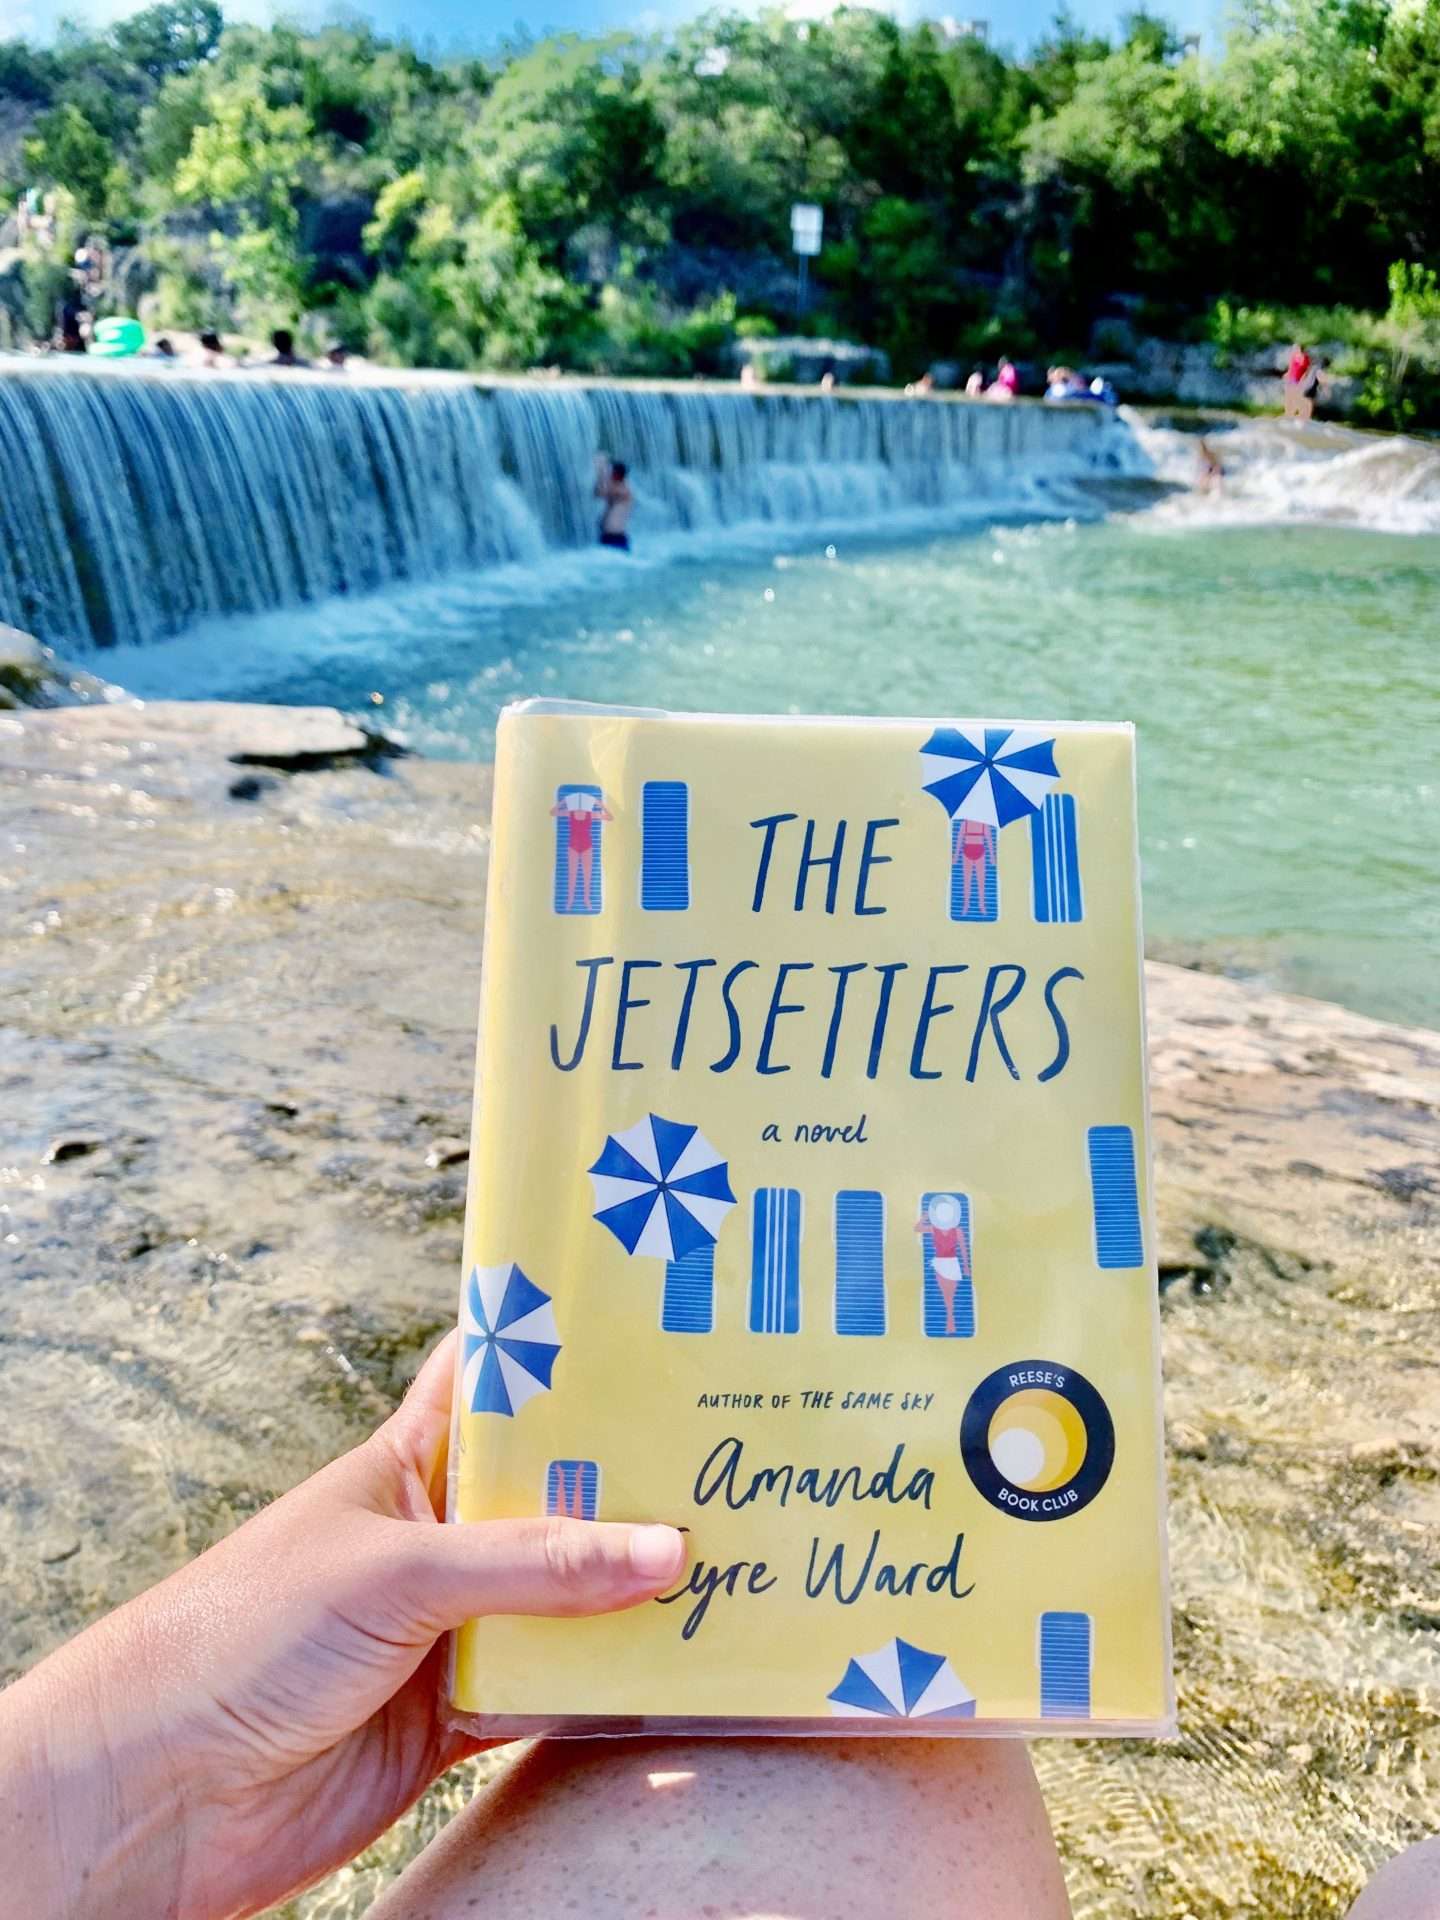 Reading the novel 'Jetsetters' while the kids swim in the San Gabriel river.